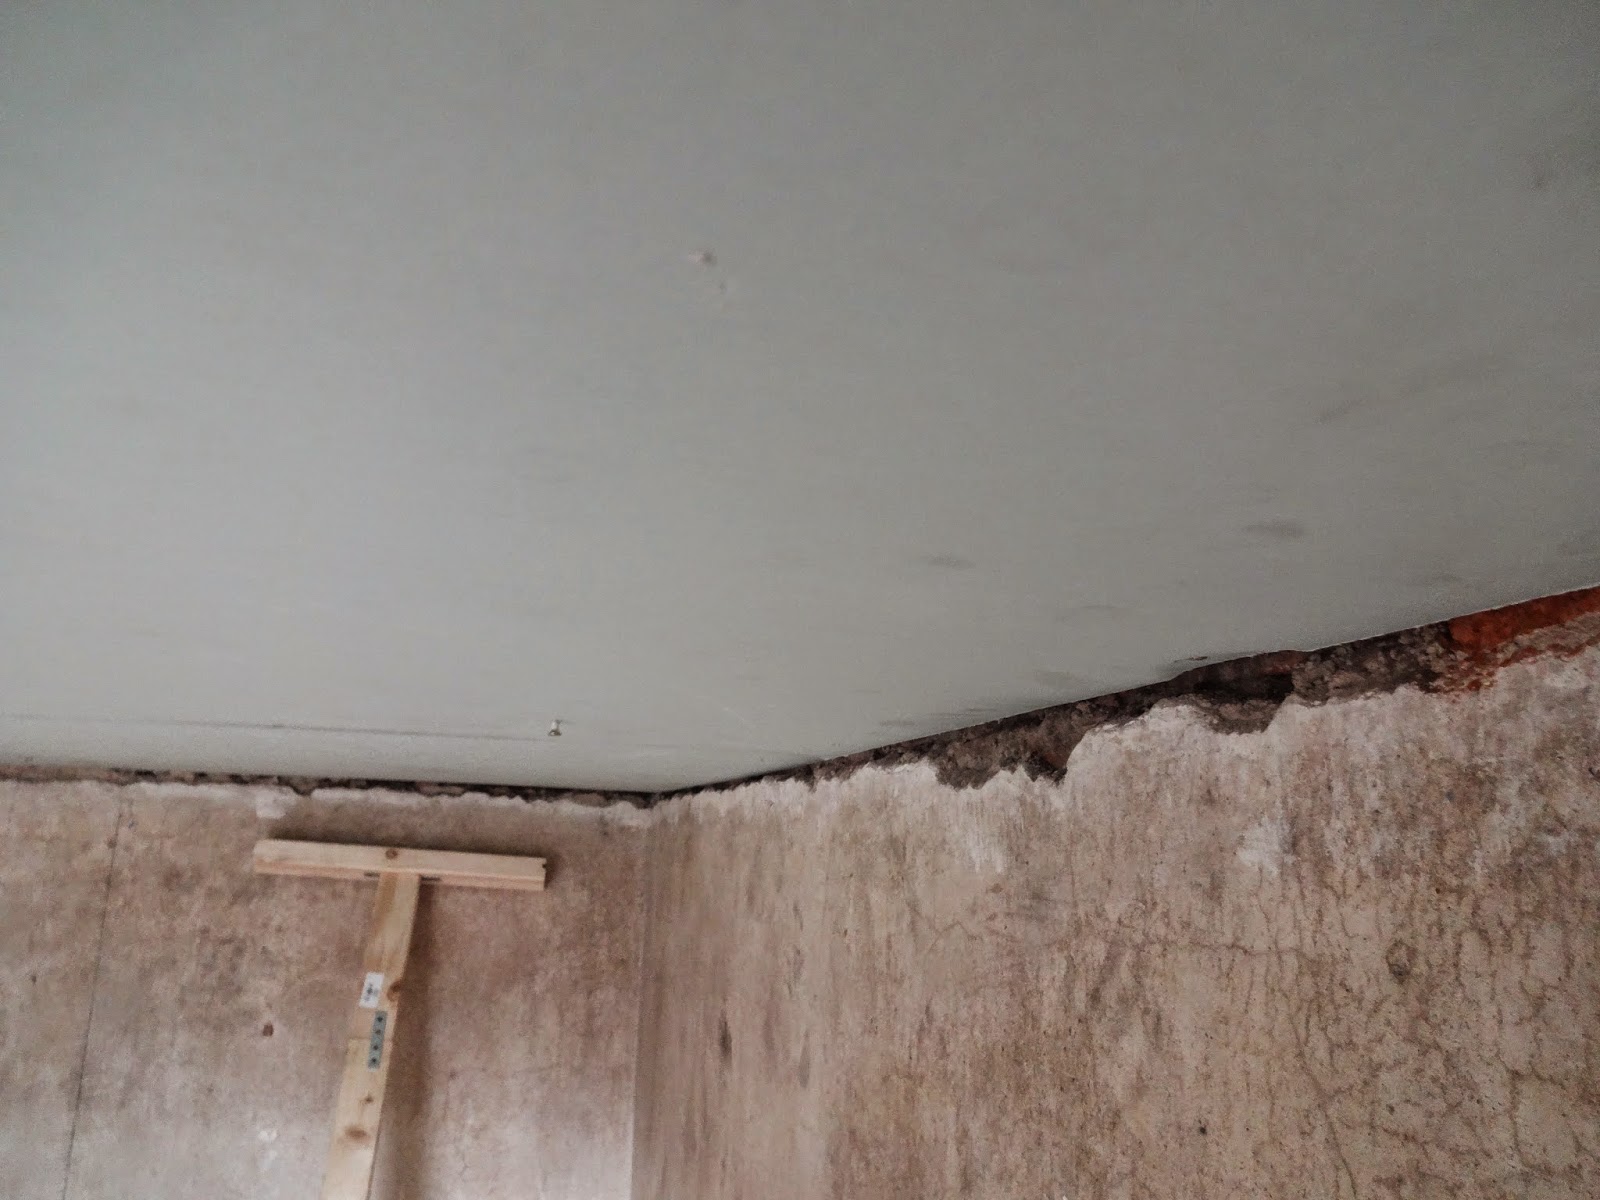 How To Fill That Gap Between The Ceiling And Wall